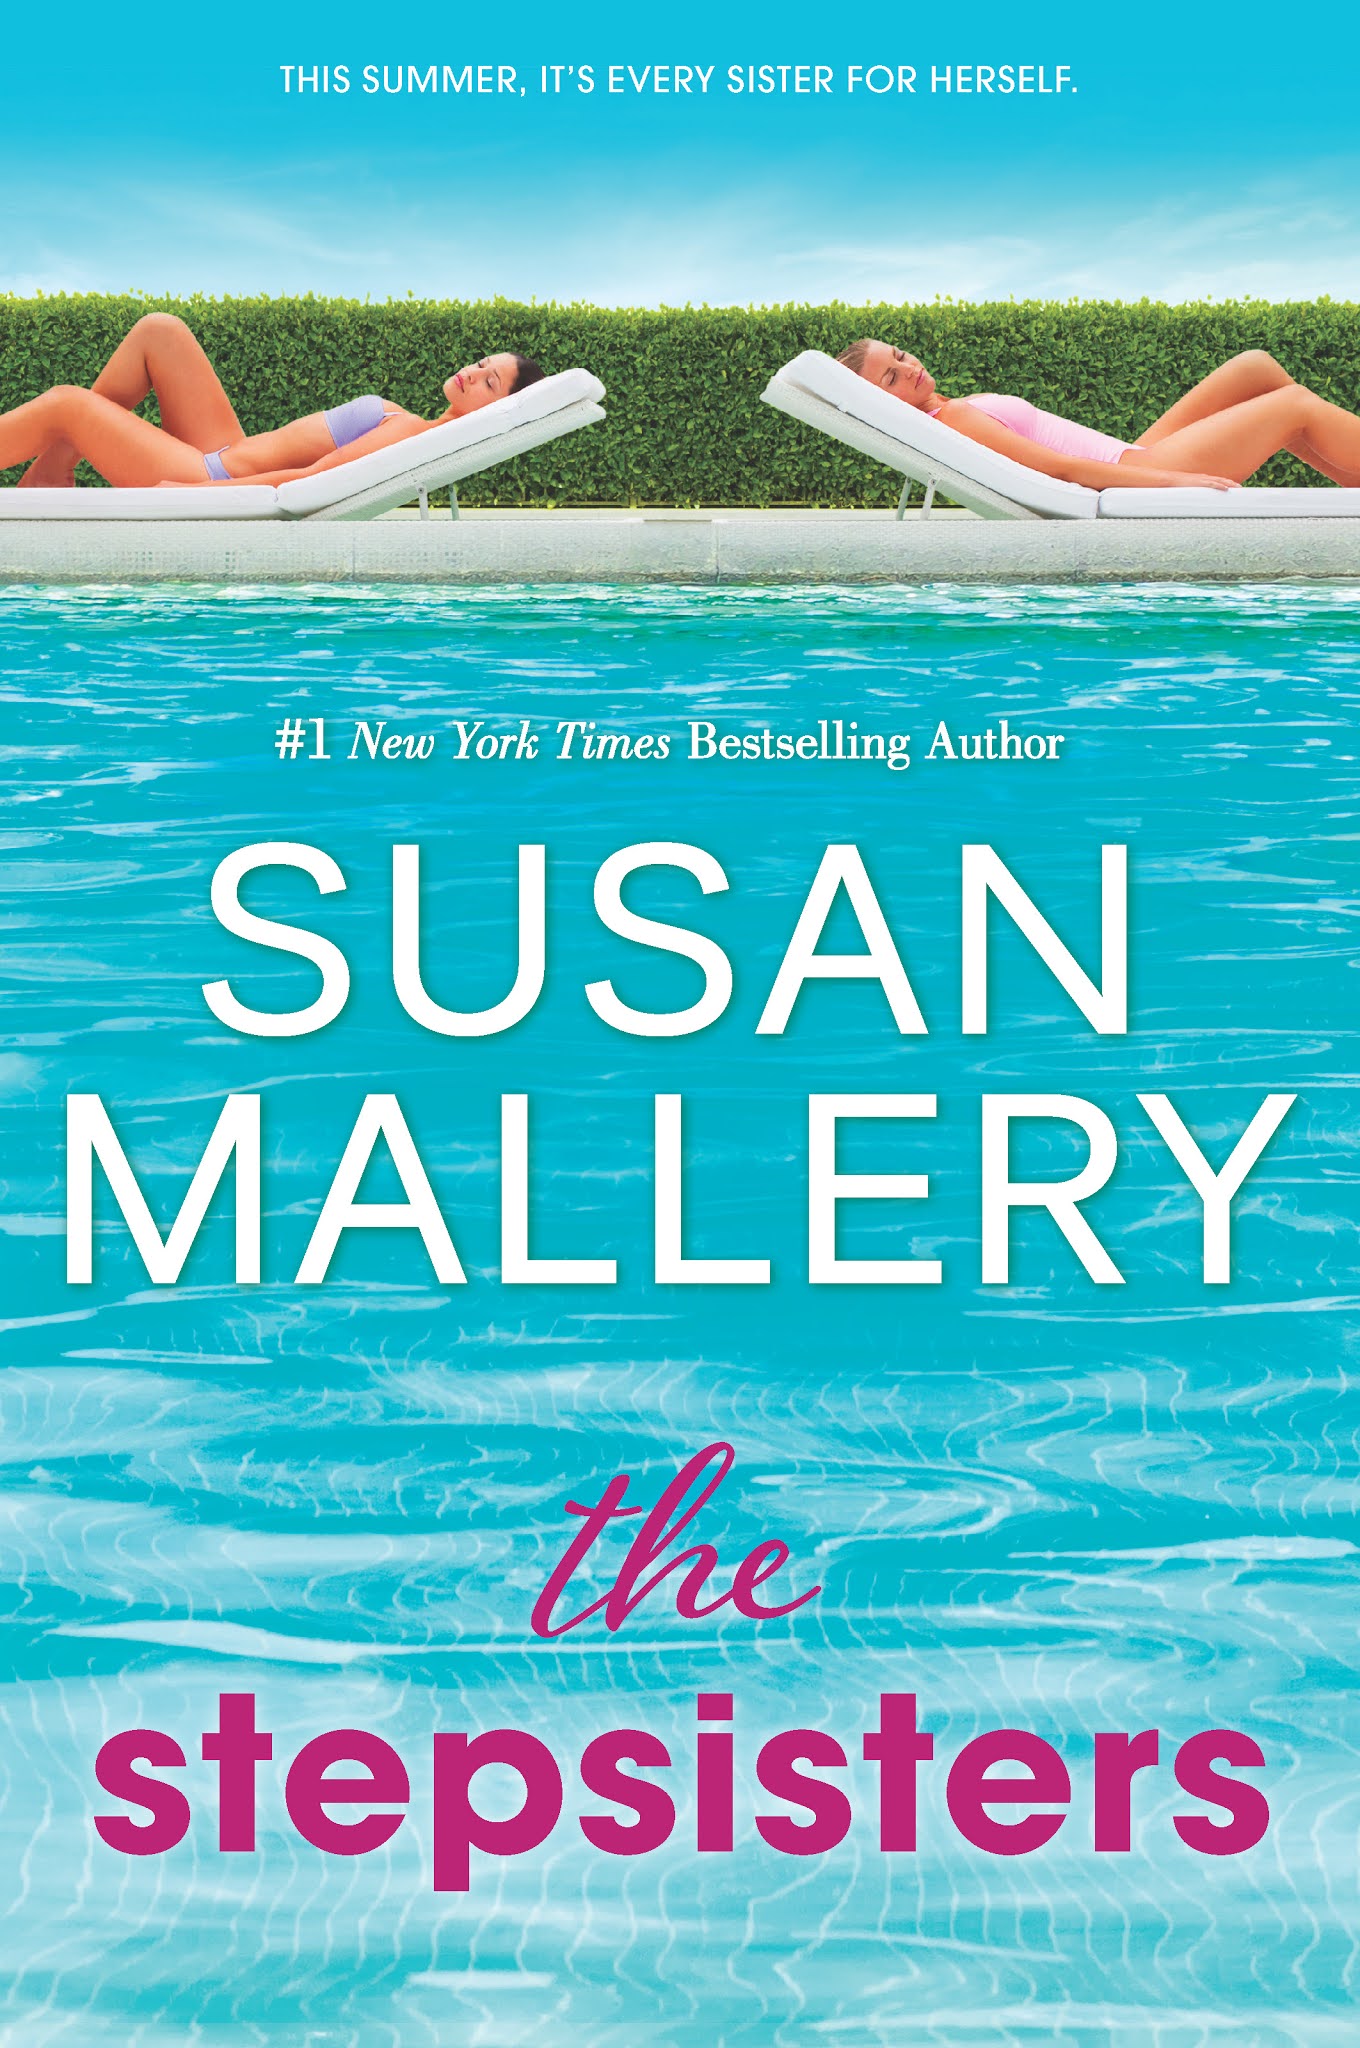 The Stepsisters by Susan Mallery pic